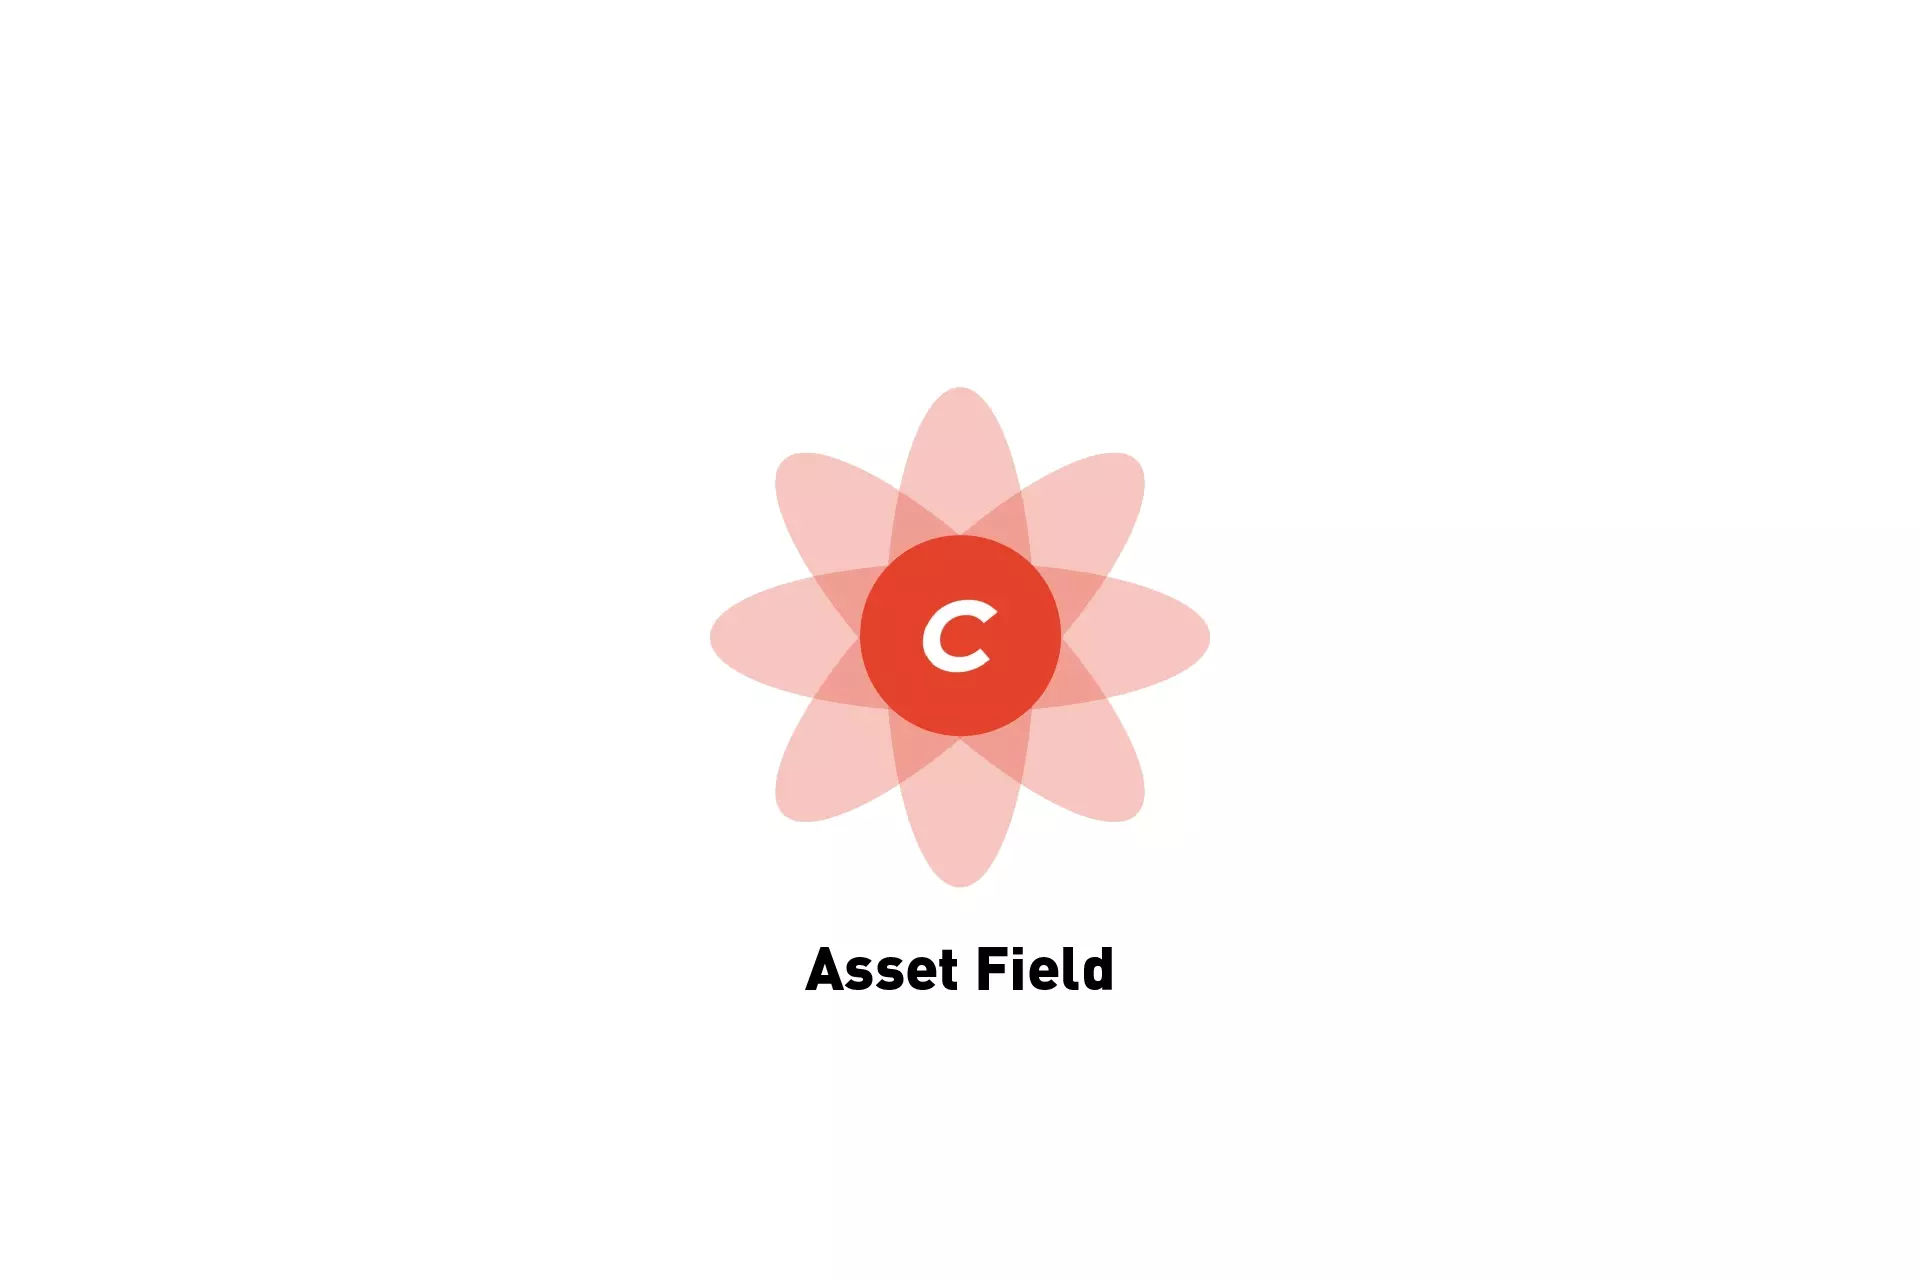 A flower that represents Craft CMS with the text "Asset Field" beneath it.